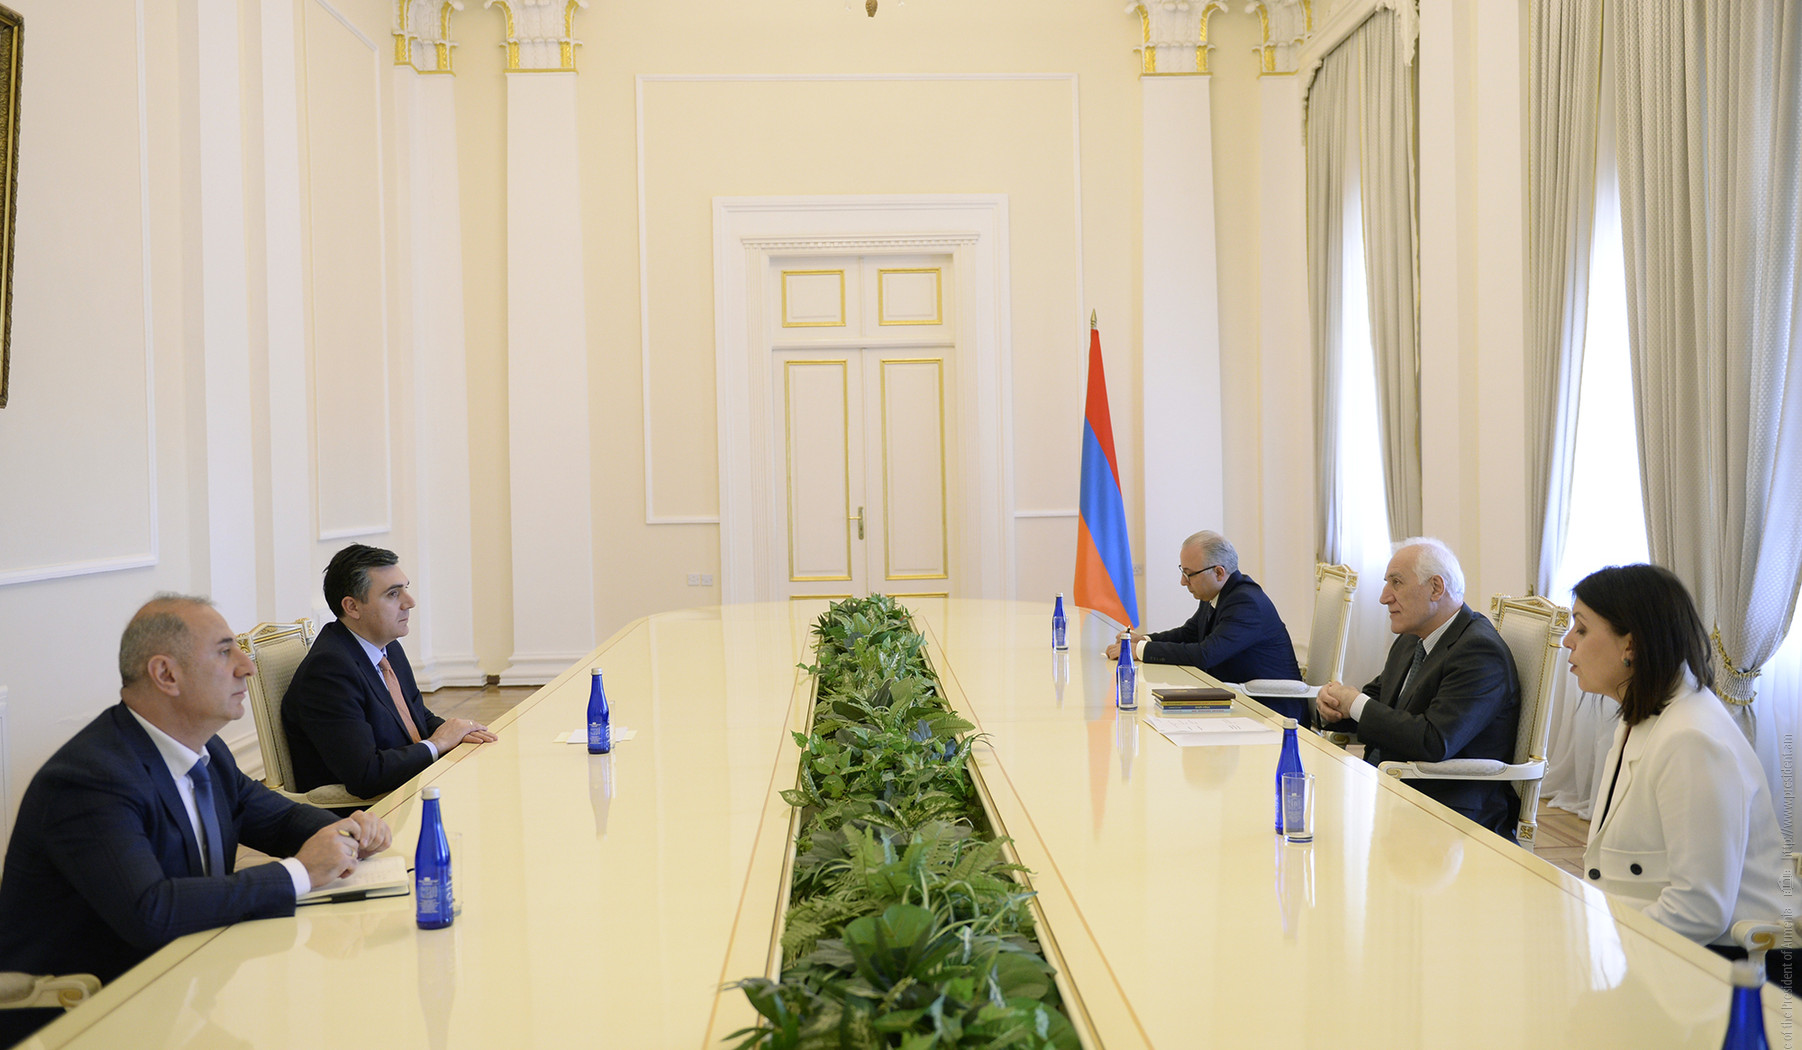 President of Armenia and Foreign Minister of Georgia highlighted establishment of stability and peace in the region